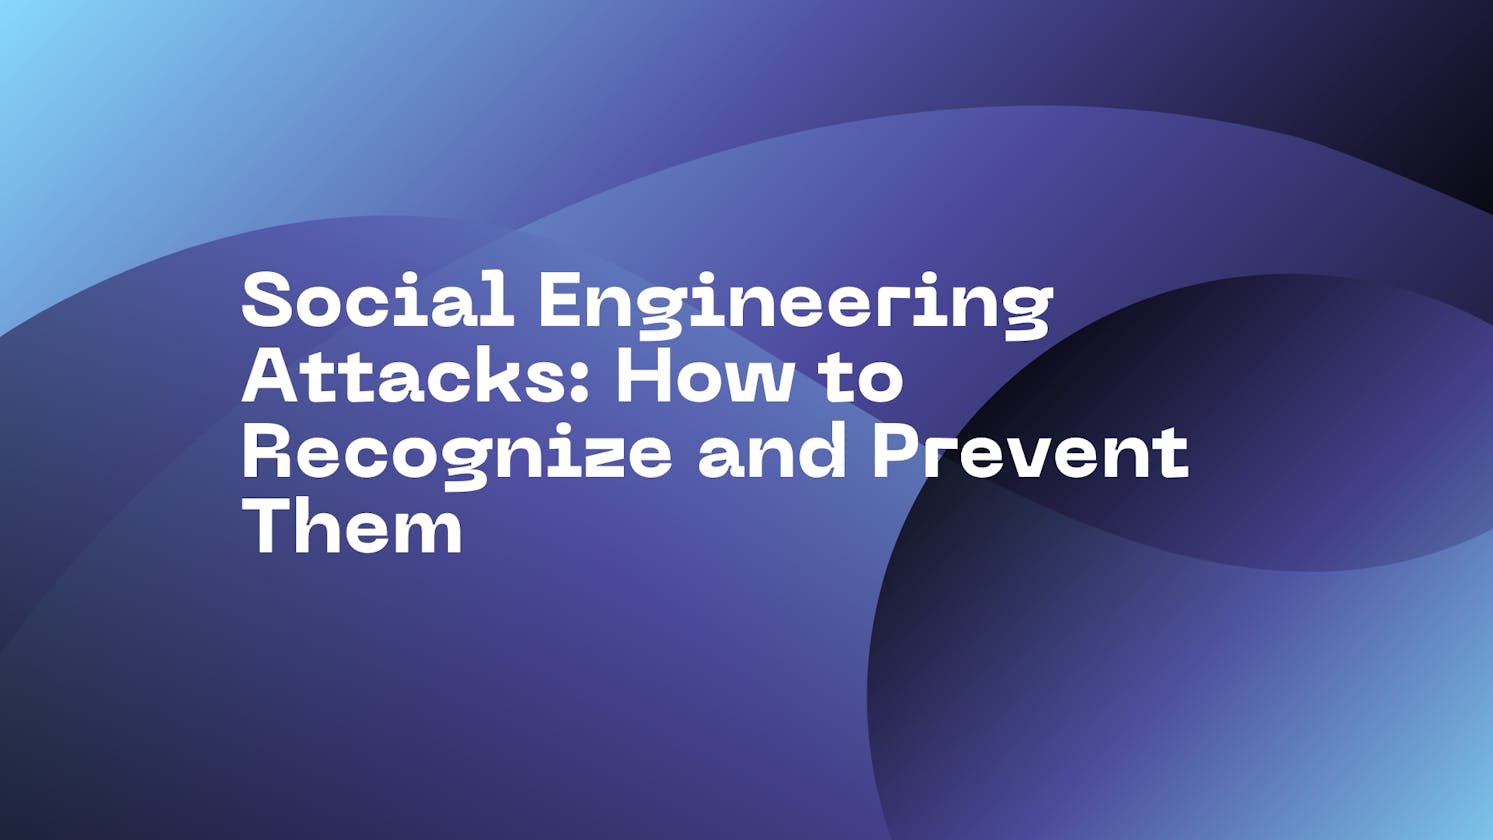 Social Engineering Attacks: How to Recognize and Prevent Them